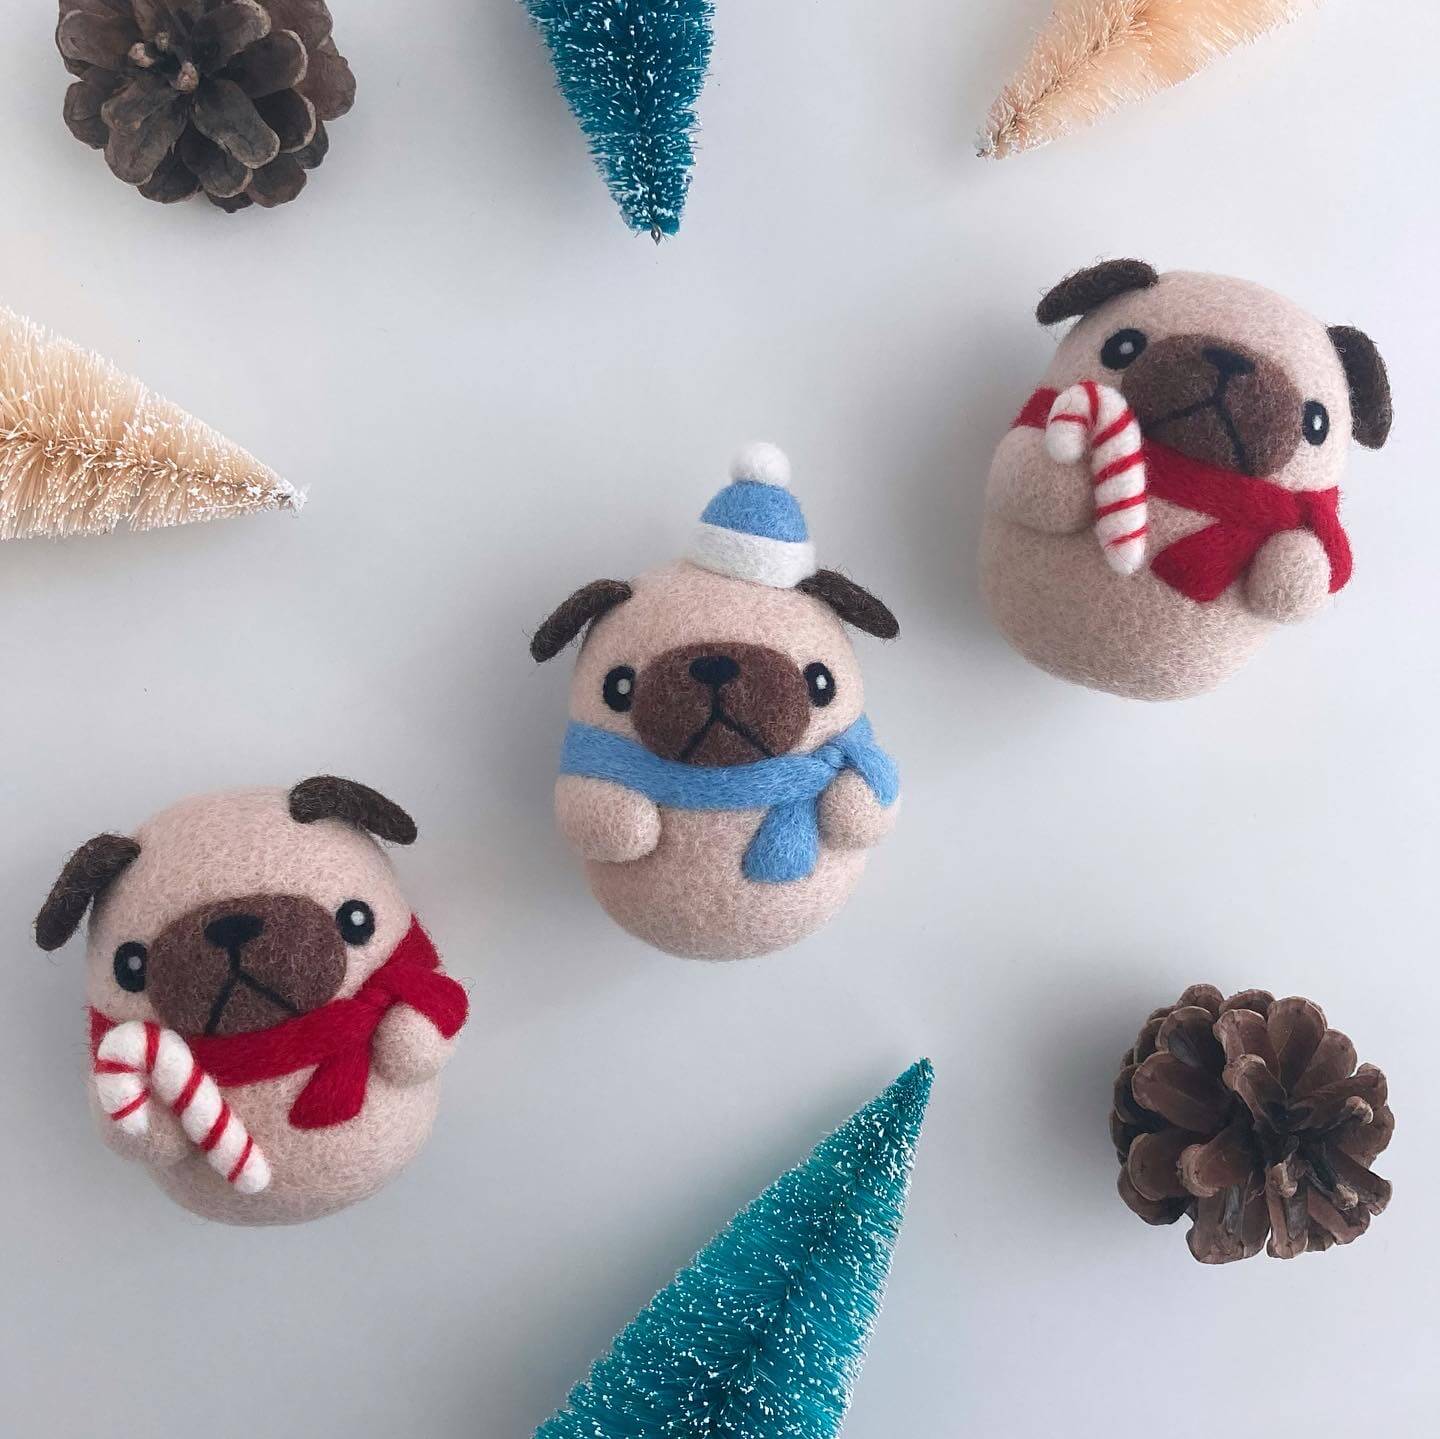 Needle Felted Pug with Candy Cane